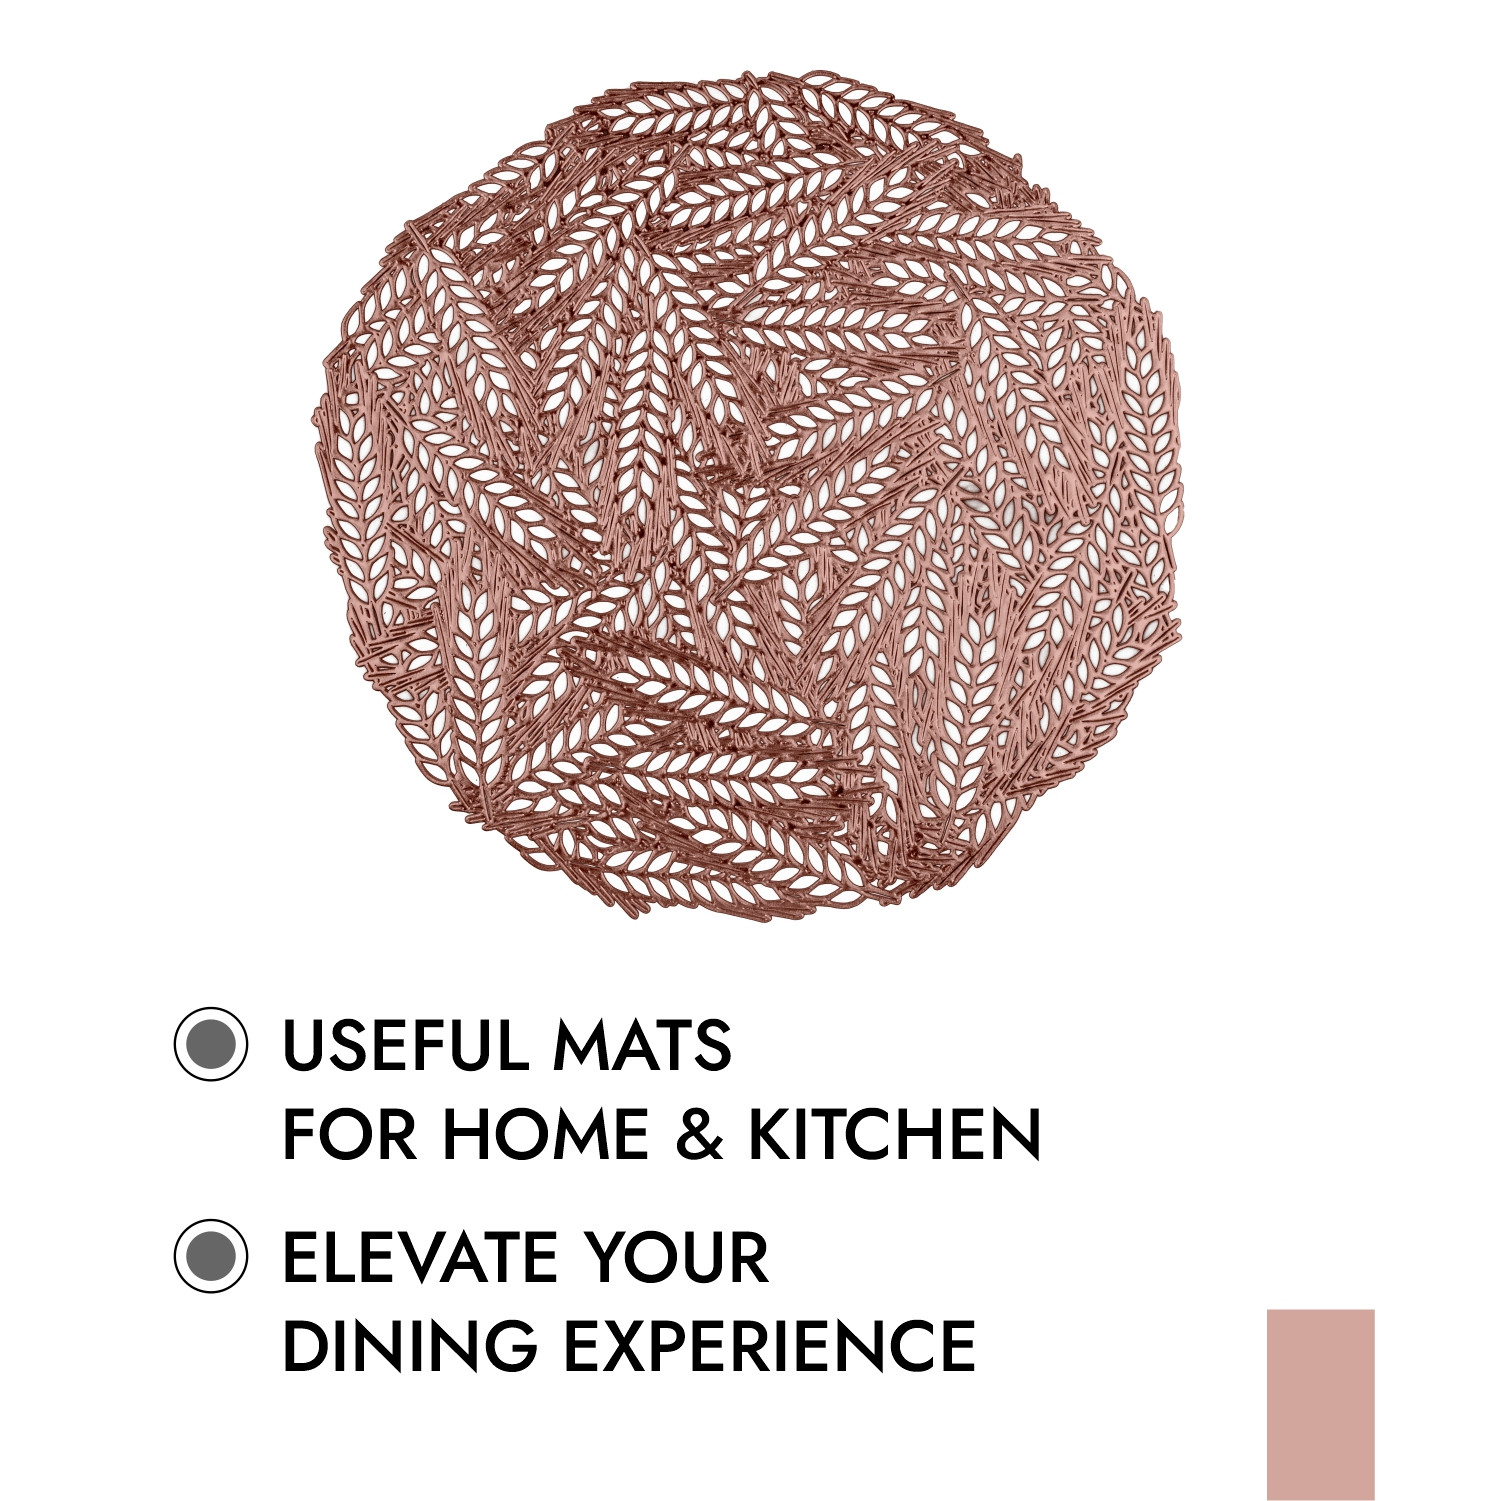 Kuber Industries Placemat | Placemats for Dining Room | Designer Table Mat Set | Placemats for Kitchen Table | Round Table Placemats | Leaf-Design Placemat |Copper